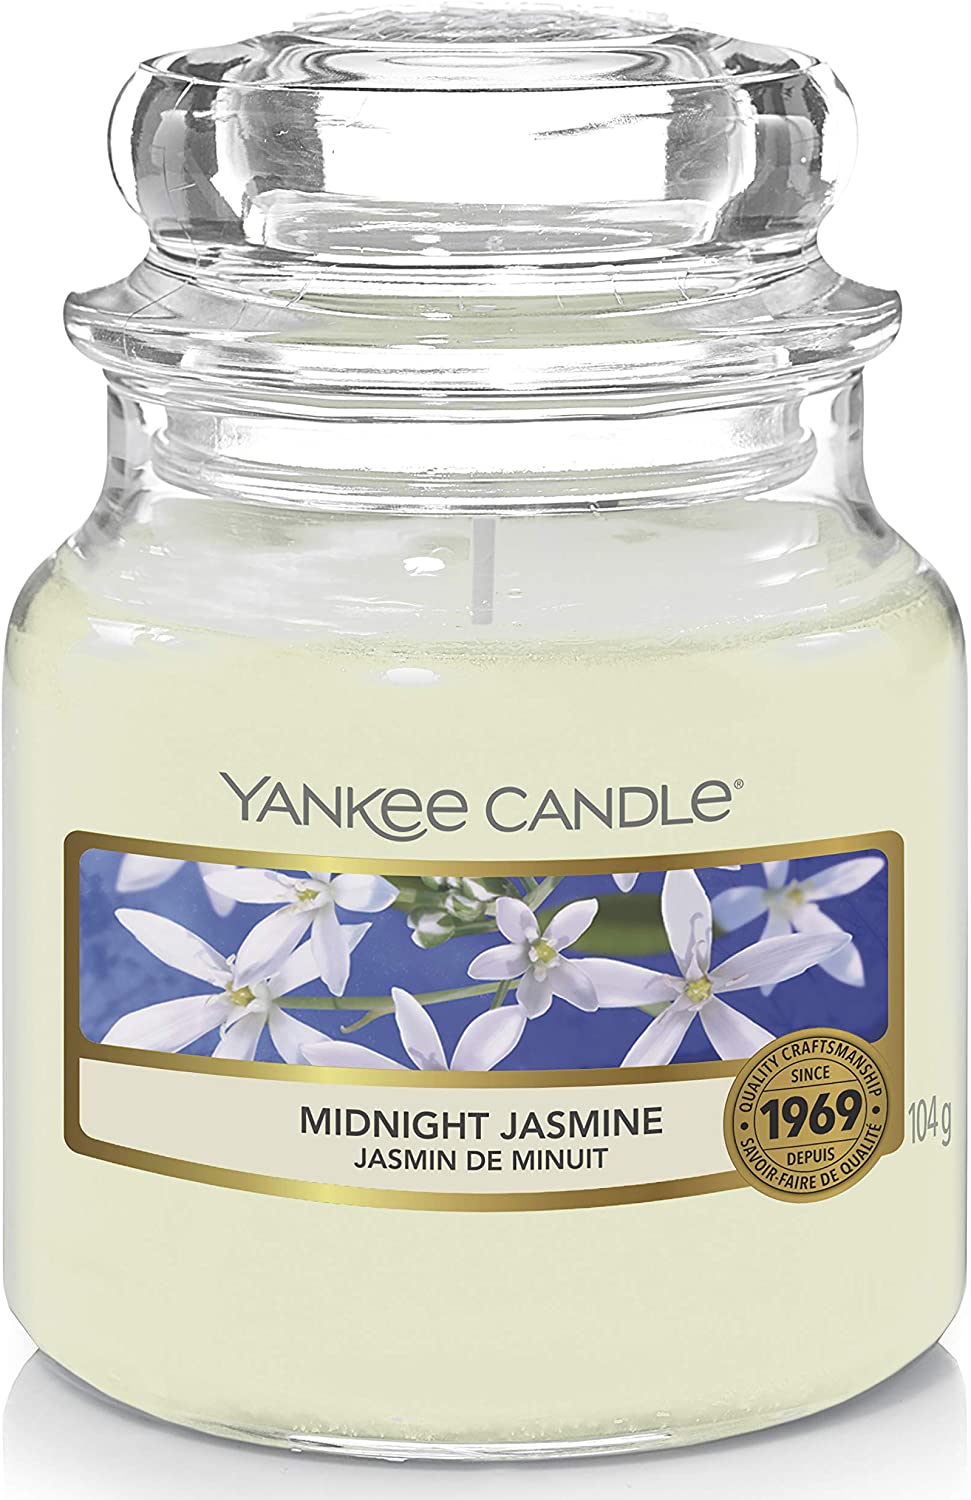 Yankee Candle Scented Midnight Jasmine Candle, Small, White